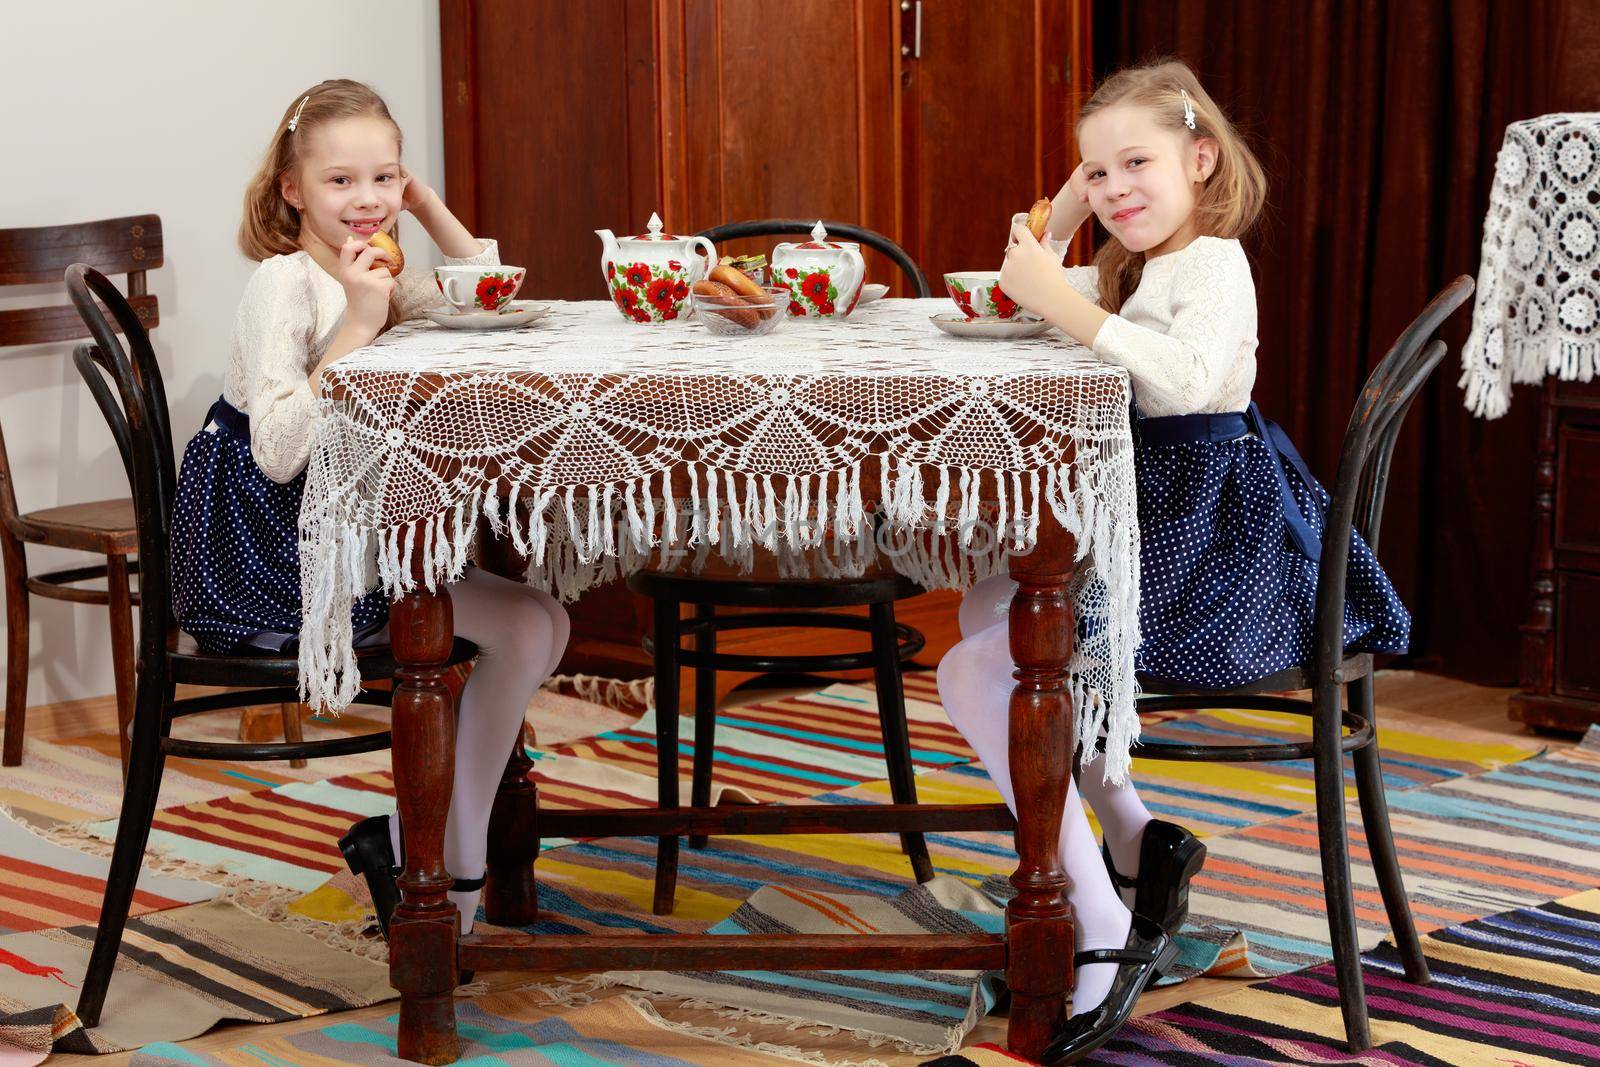 Cute little girls twins drinking tea at an antique table with a lace tablecloth.Retro style.